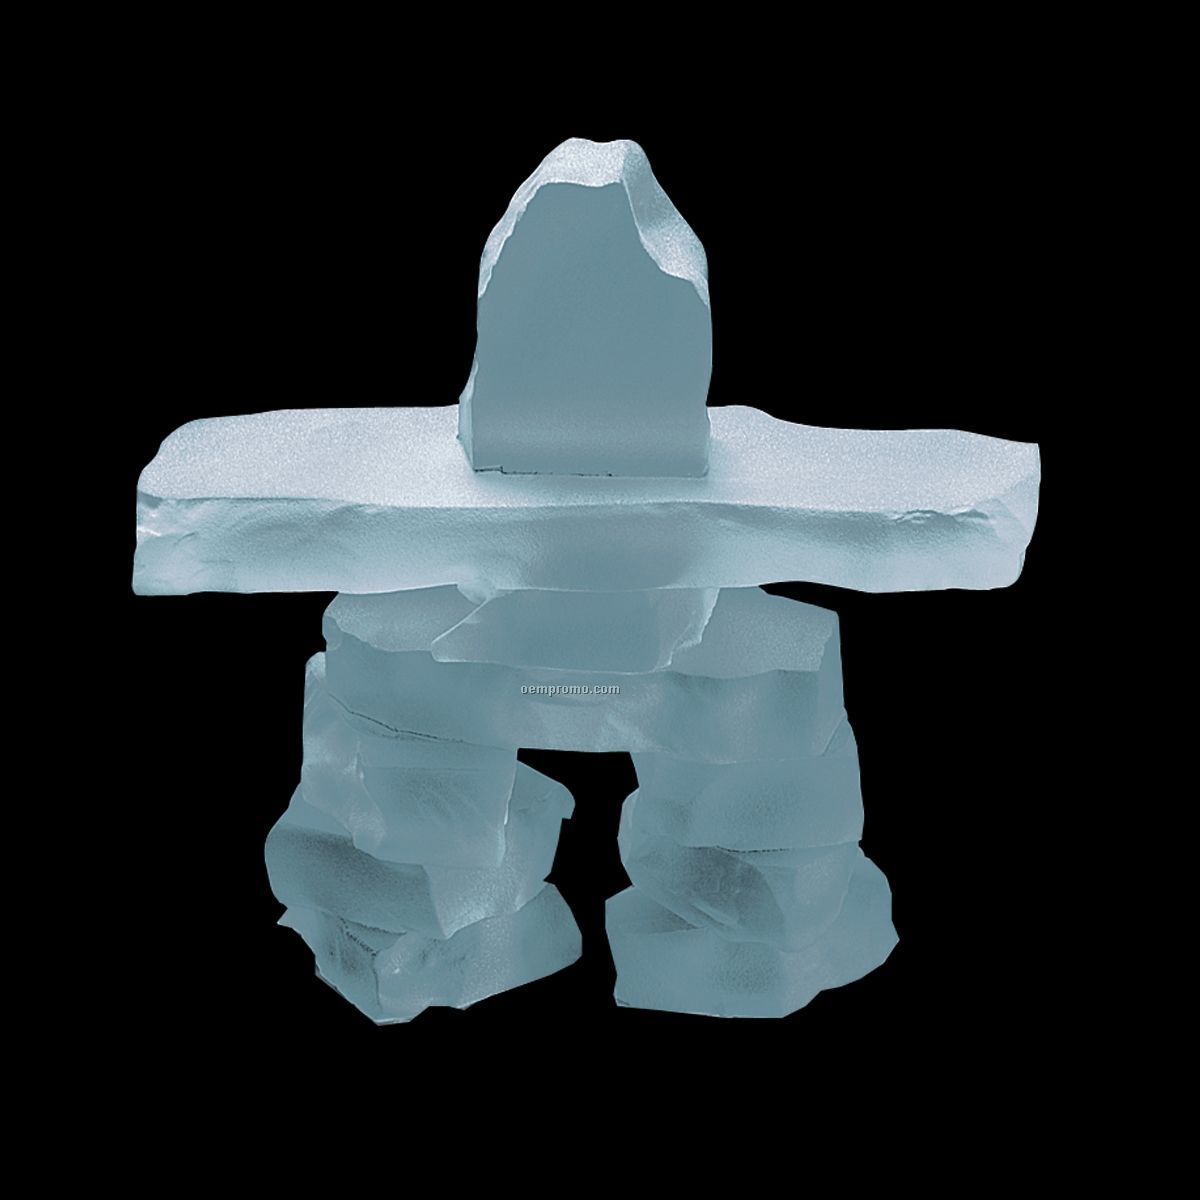 6" Frosted Inukshuk Sculpture